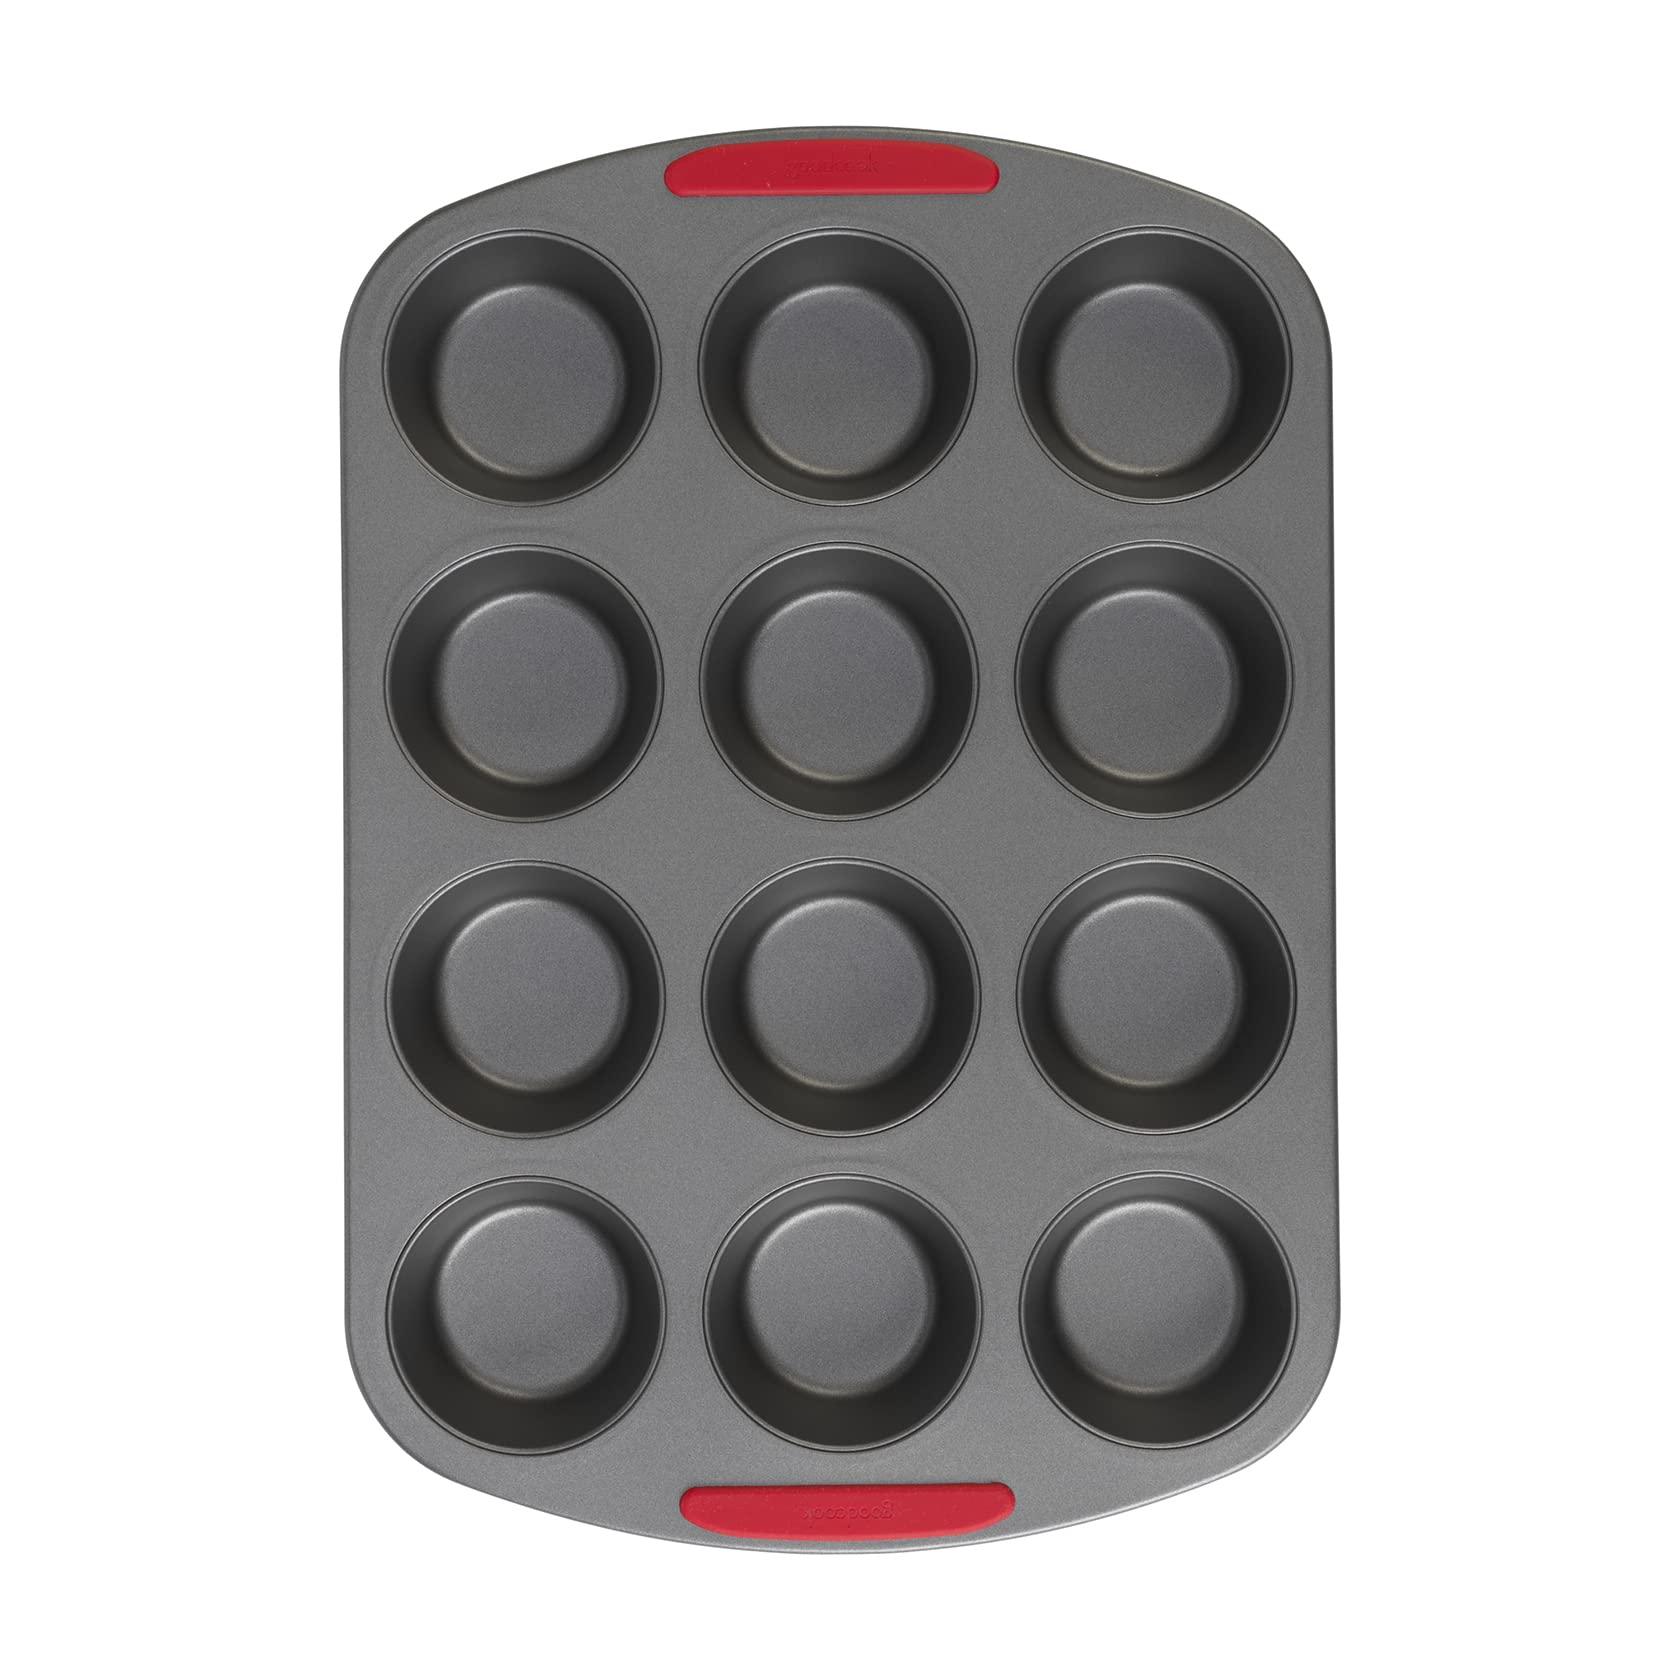 GoodCook MegaGrip 12-Cup Nonstick Steel Cupcake and Muffin Pan with Silicone Grip Handles, Gray - CookCave